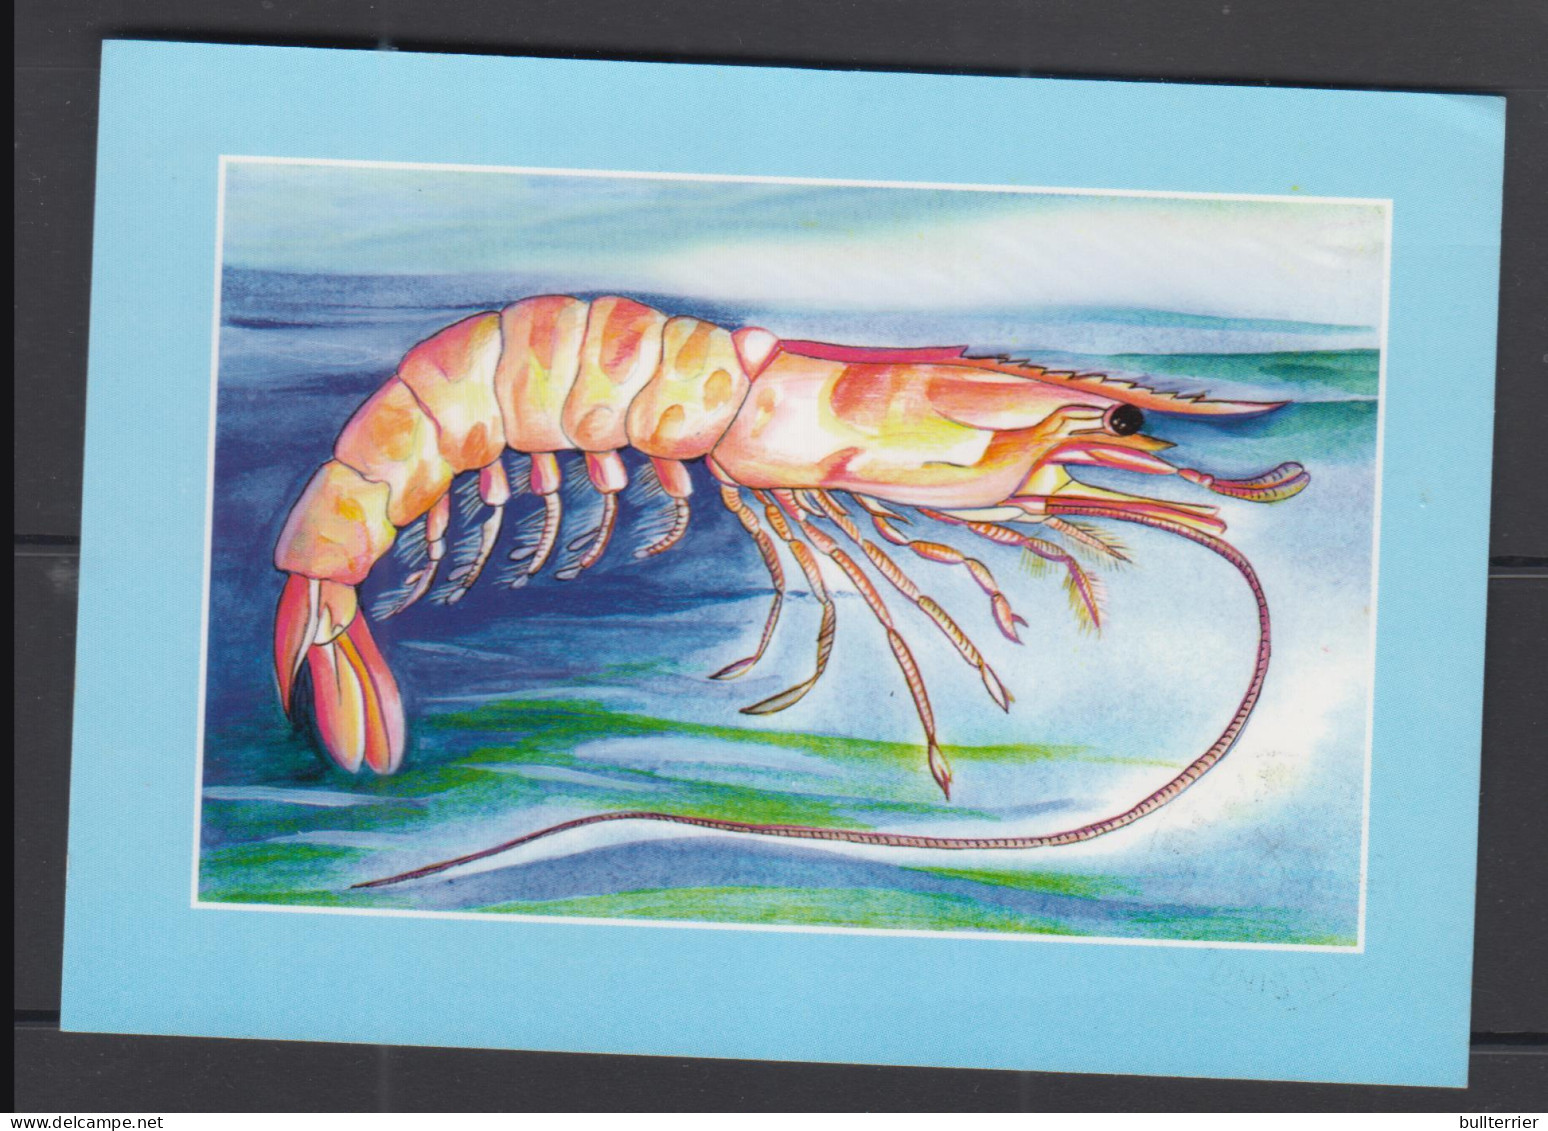 MARINE LIFE - TUNISIA - 1999 - POSTCARD TO  GERMANY WITH CRUSTACEANS SET OF 3 IMPERF - Crustaceans